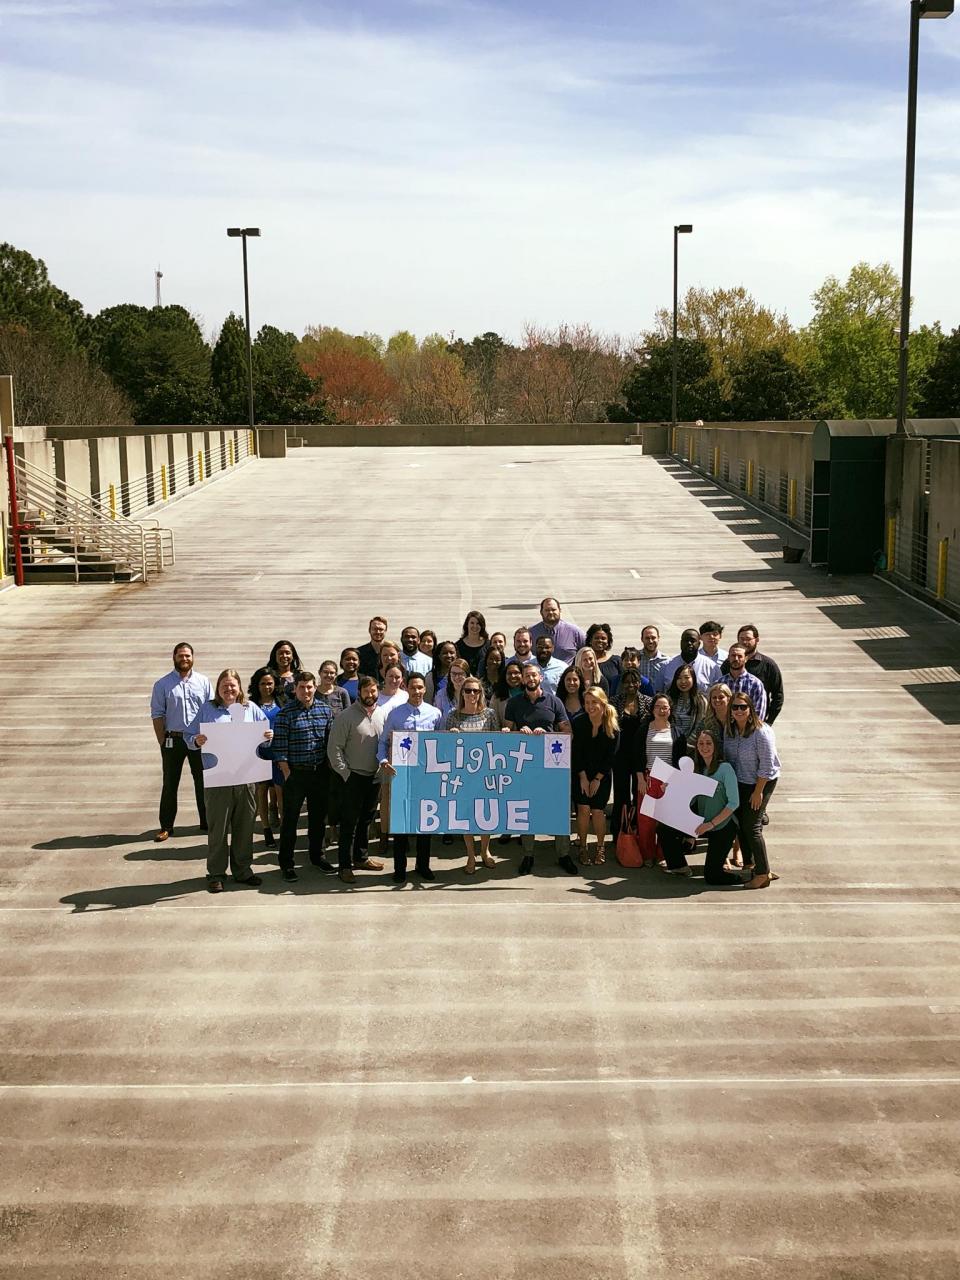 We make sure to support a cause that is near and dear to ours and our candidates’ hearts by wearing blue on Autism Awareness Day. Many of our team members also donate or volunteer with Autism Speaks.